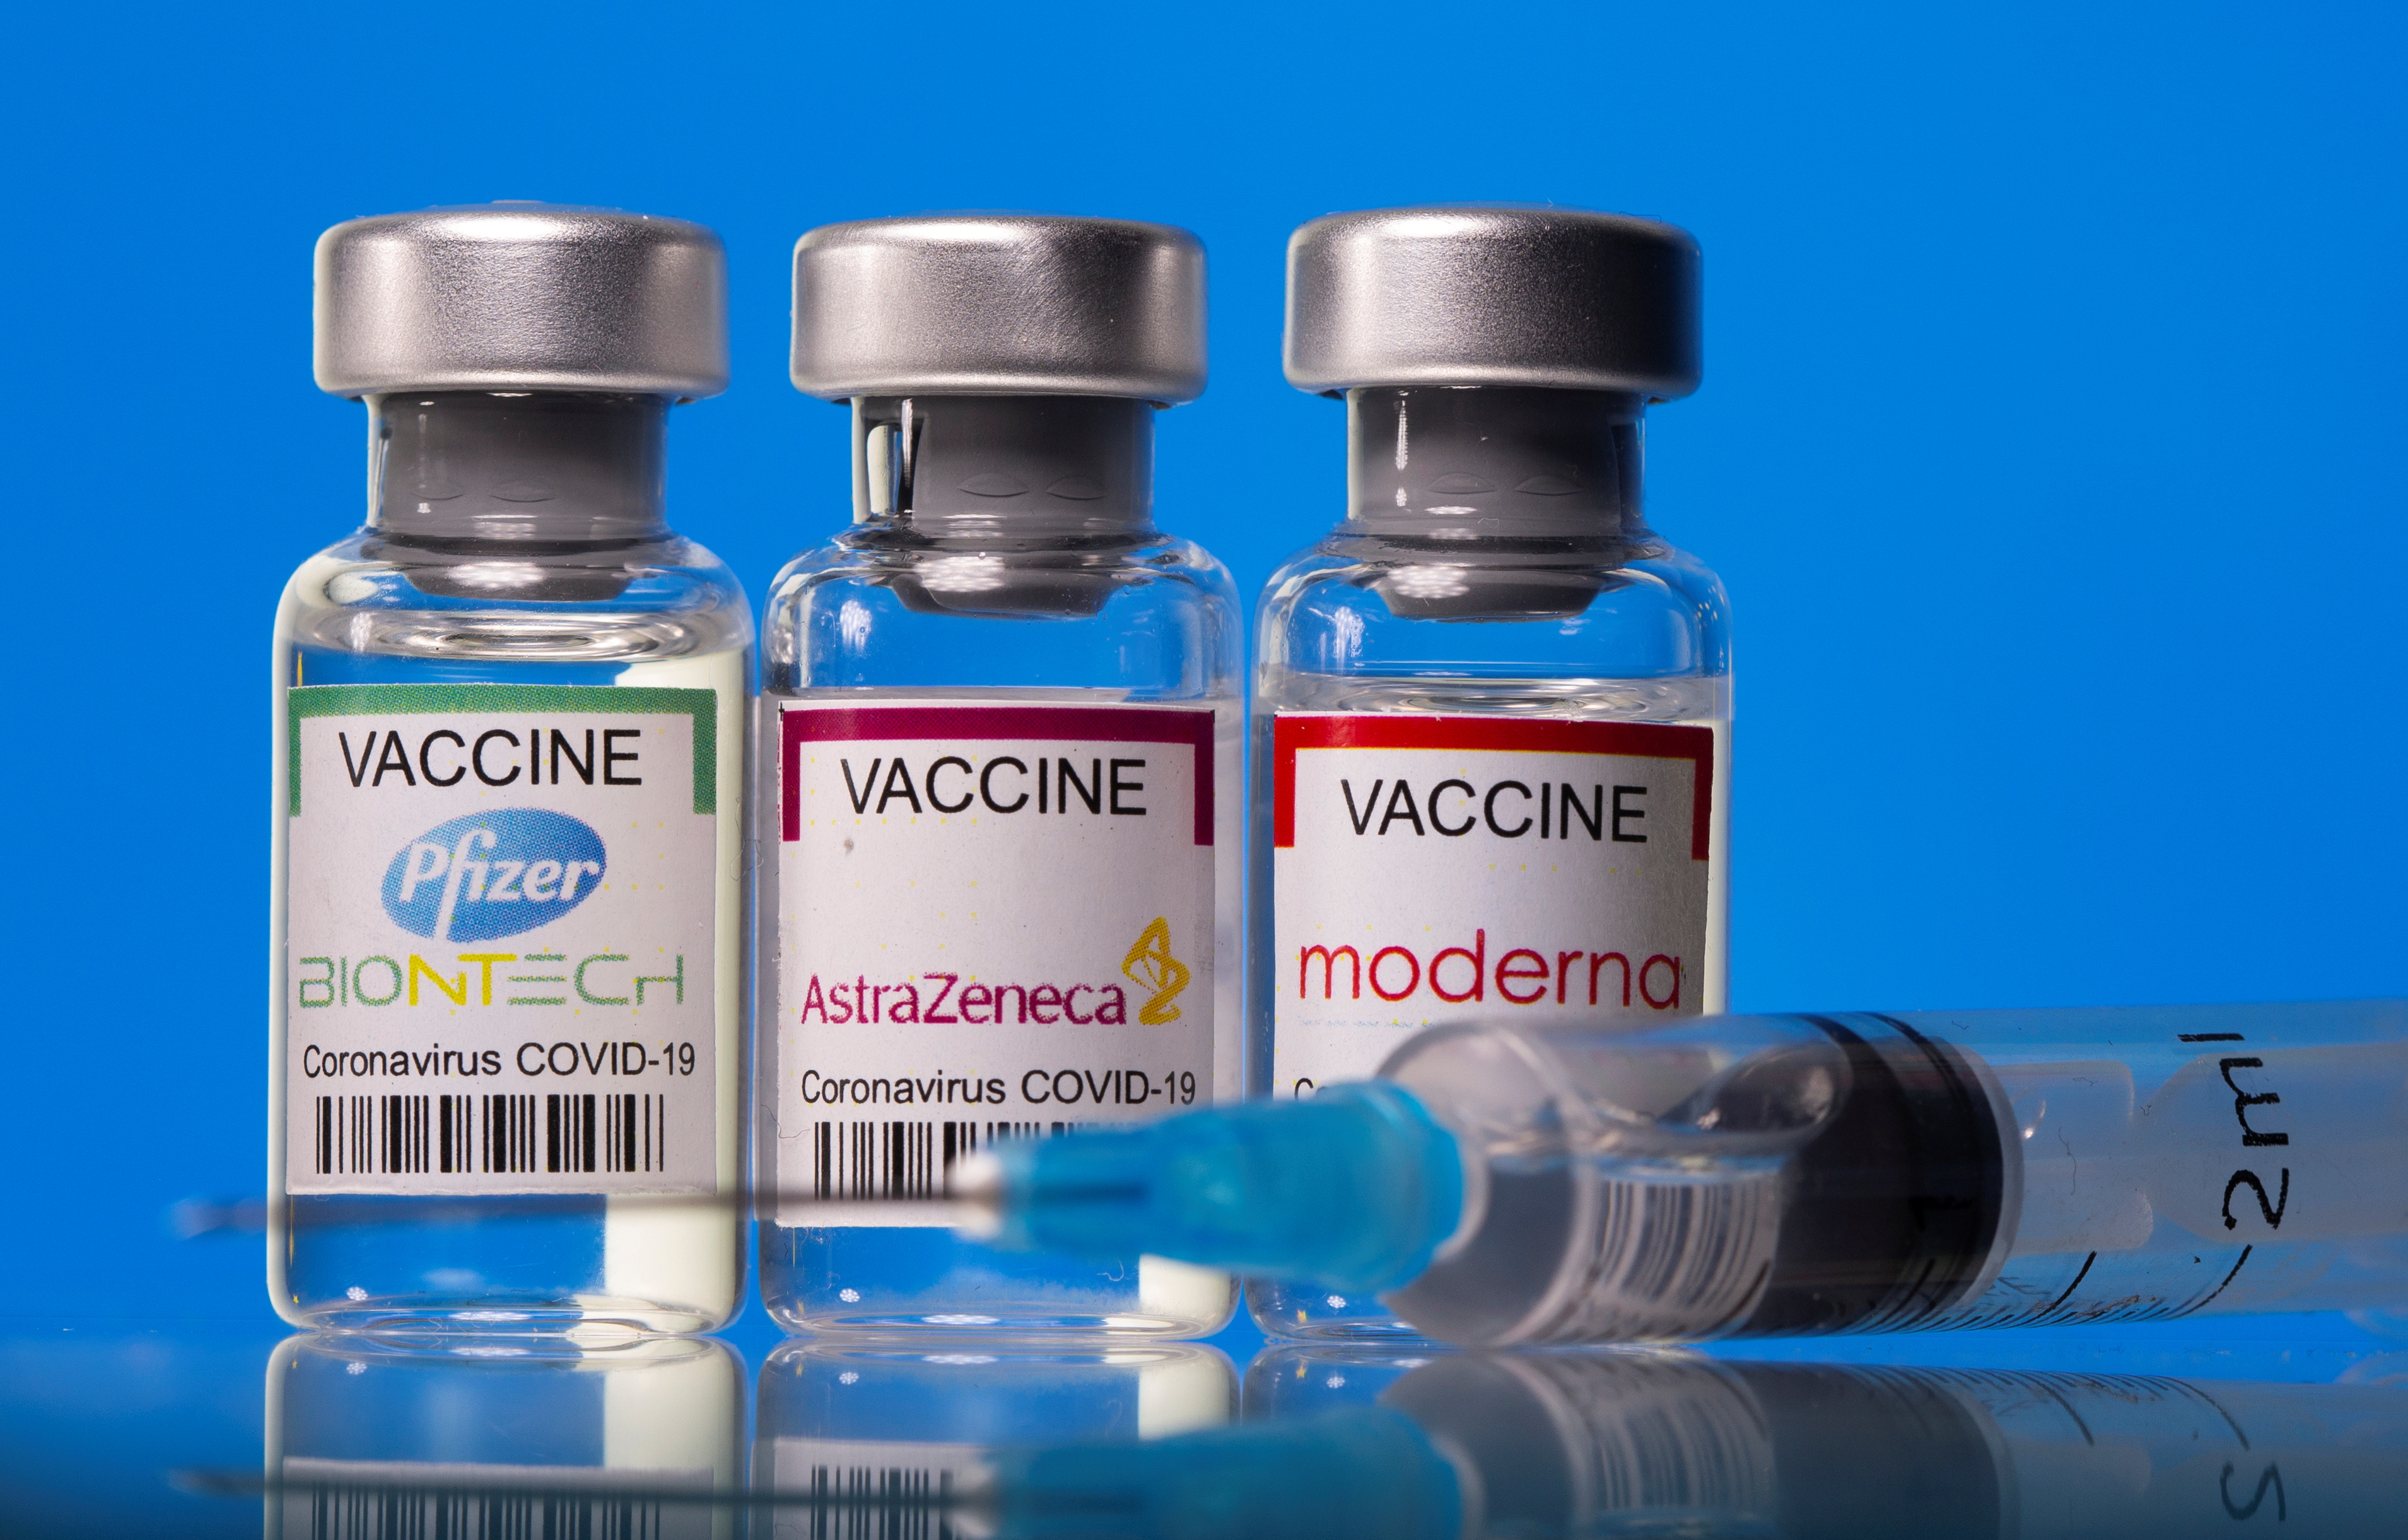 Vials with Pfizer-BioNTech, AstraZeneca, and Moderna coronavirus disease (COVID-19) vaccine labels are seen in this illustration picture taken March 19, 2021. REUTERS/Dado Ruvic/Illustration